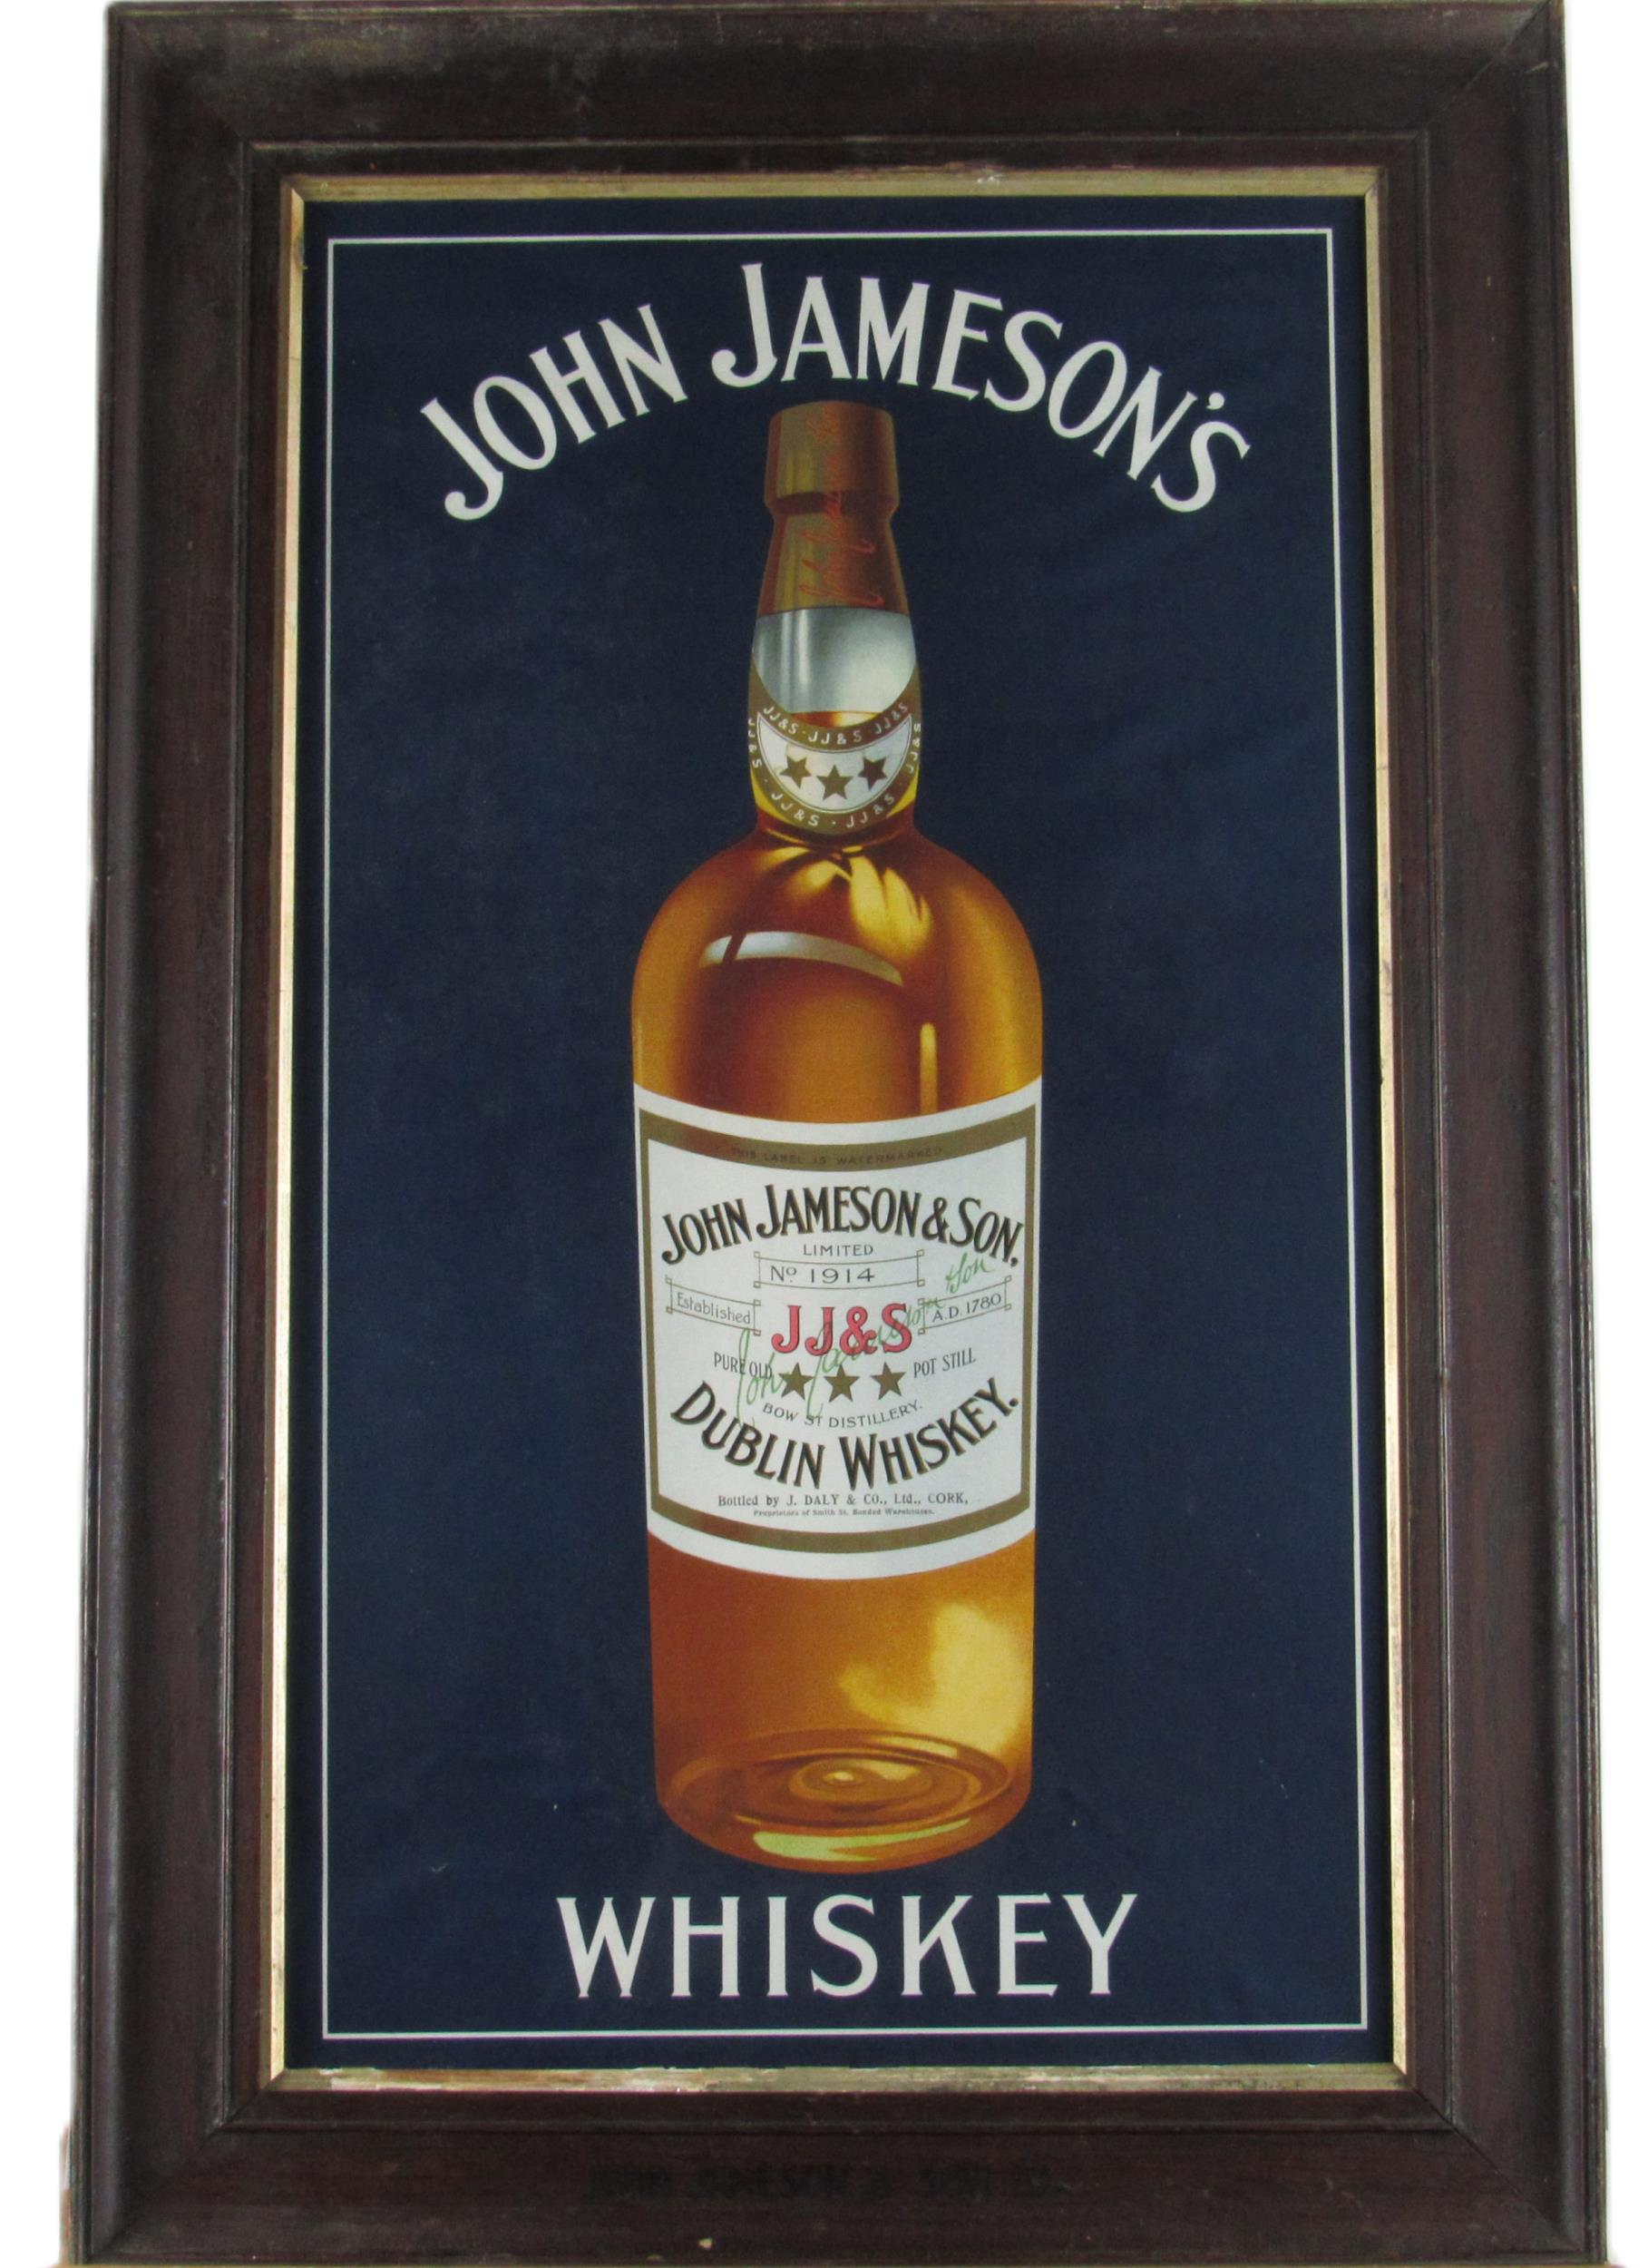 An original coloured lithographic Advertisement Poster, for "John Jamesons Whiskey - bottled by J.